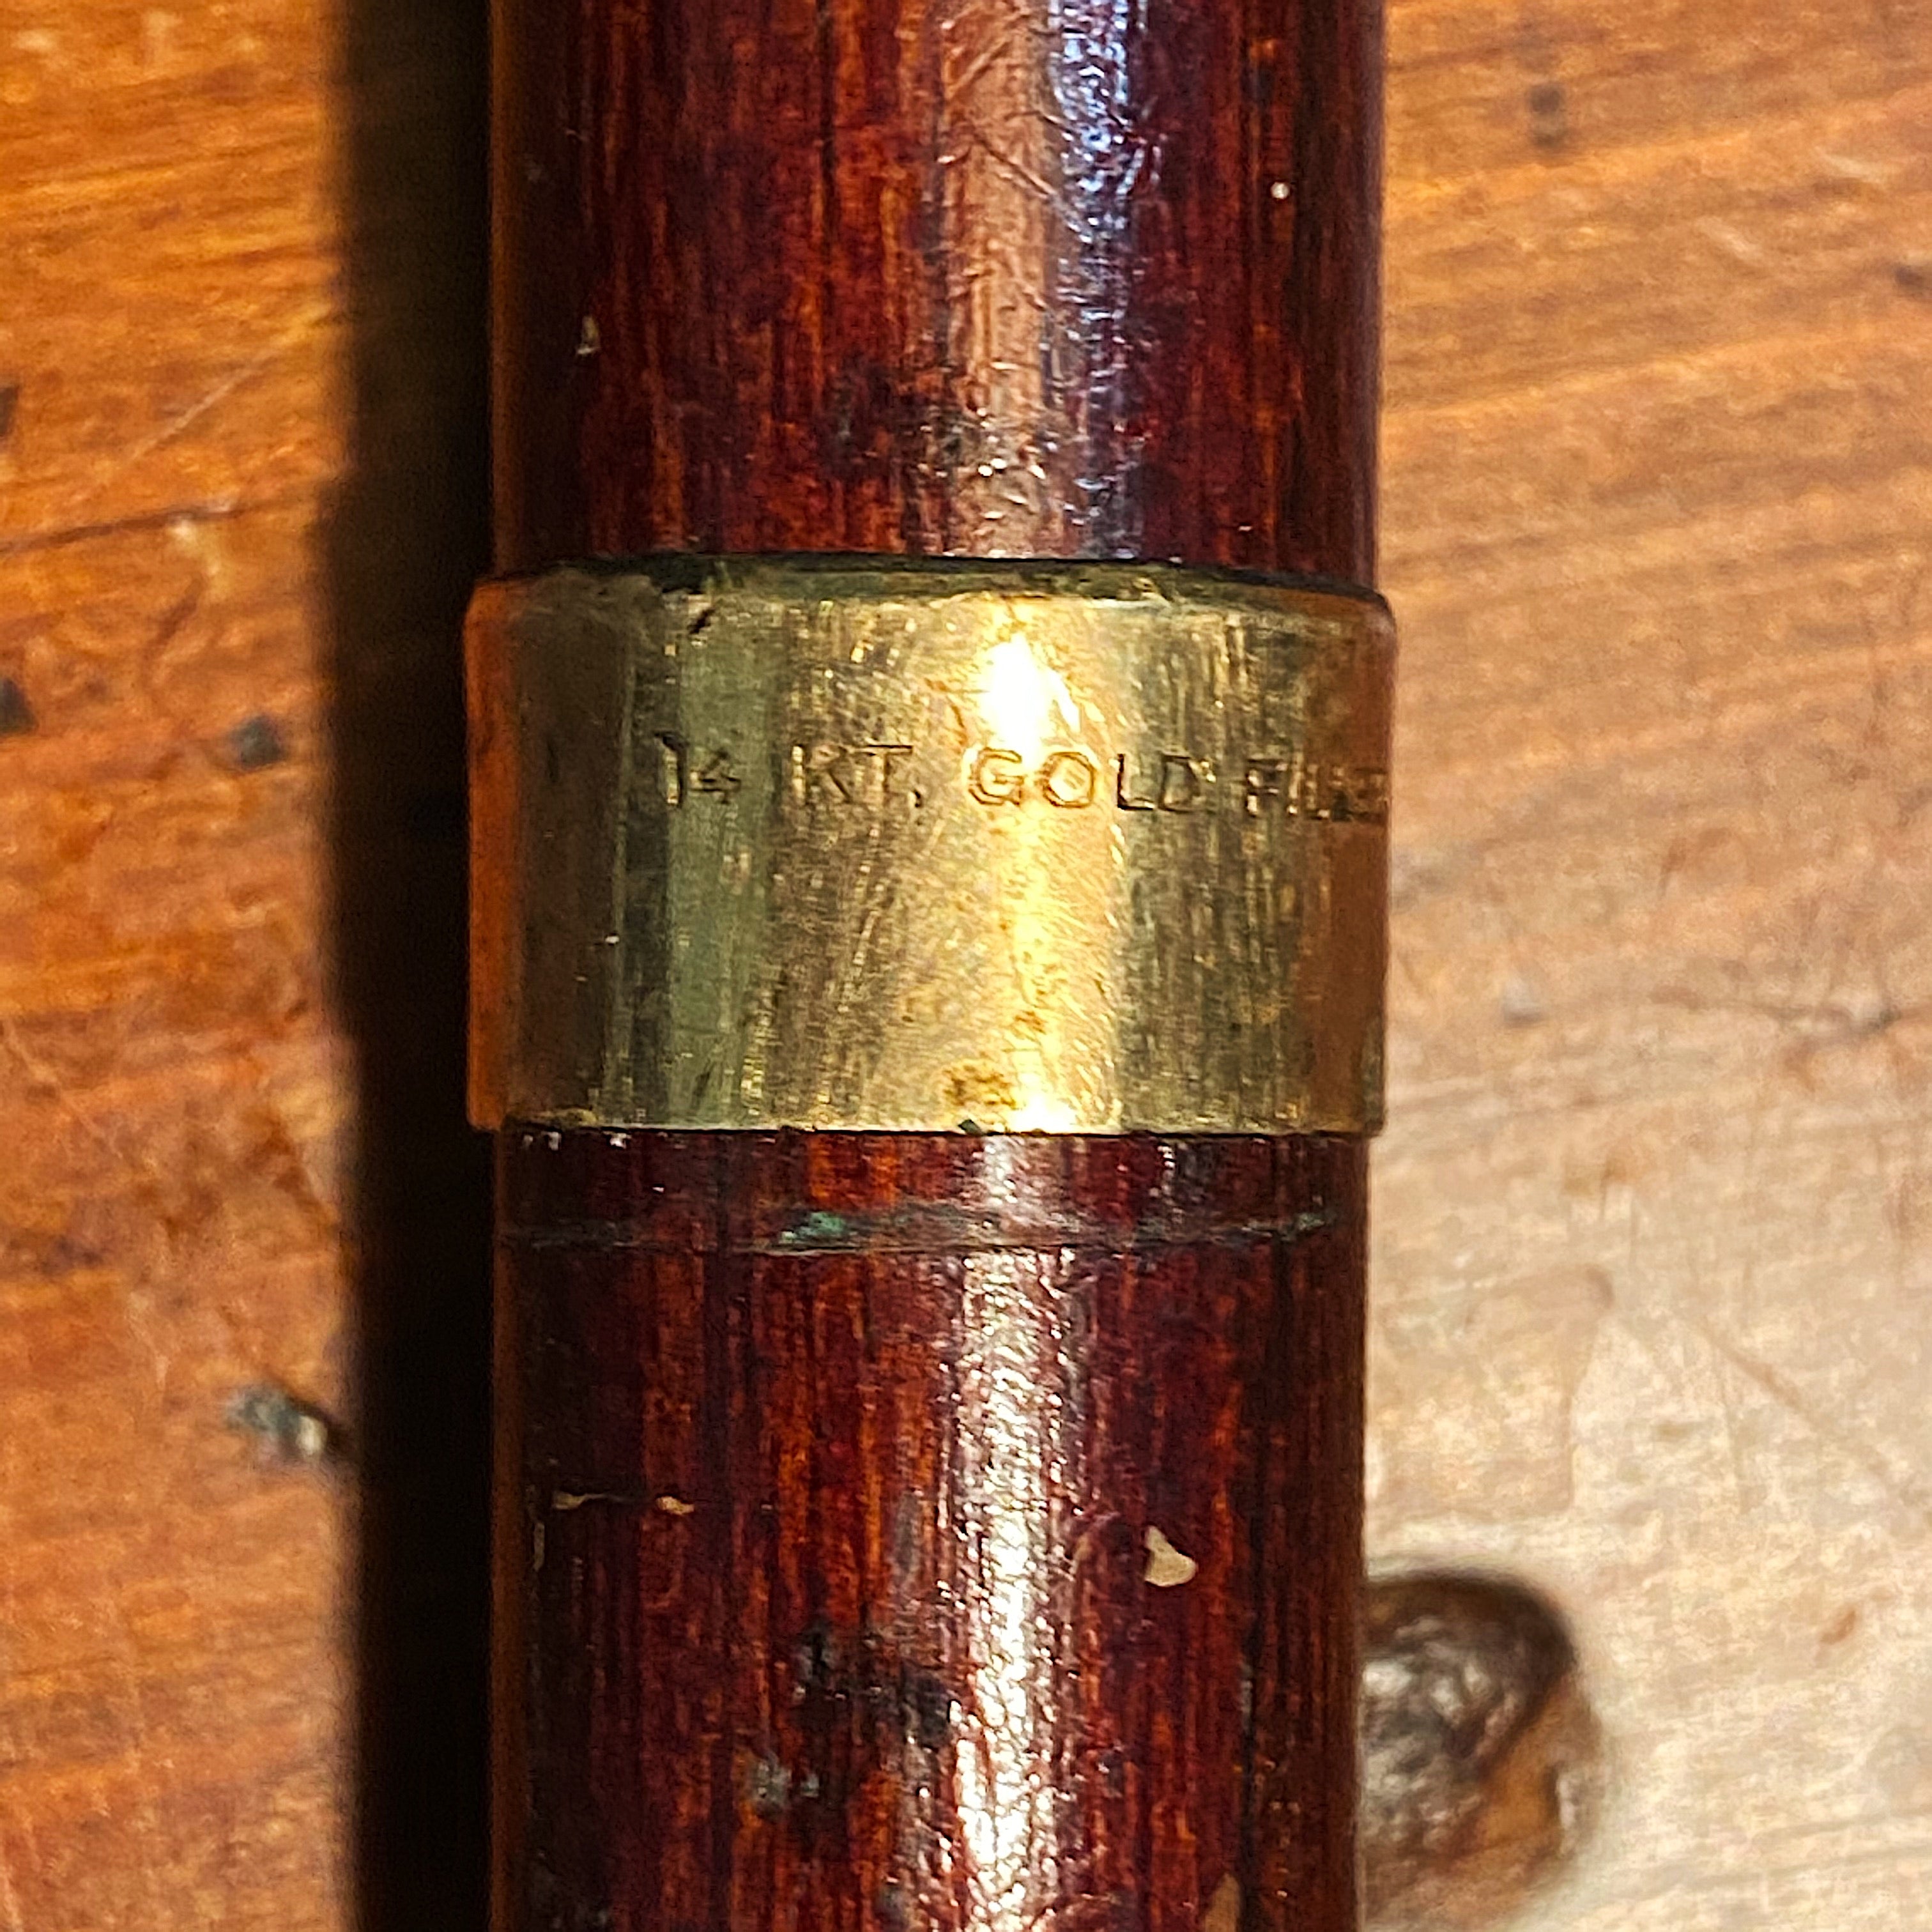 Gold Band from Antique Billy Club Cane with 14 Carat Gold Band - 32" Tall - Rare Unusual Walking Stick - 19th Century? - Patina from Use - Bad to the Bone